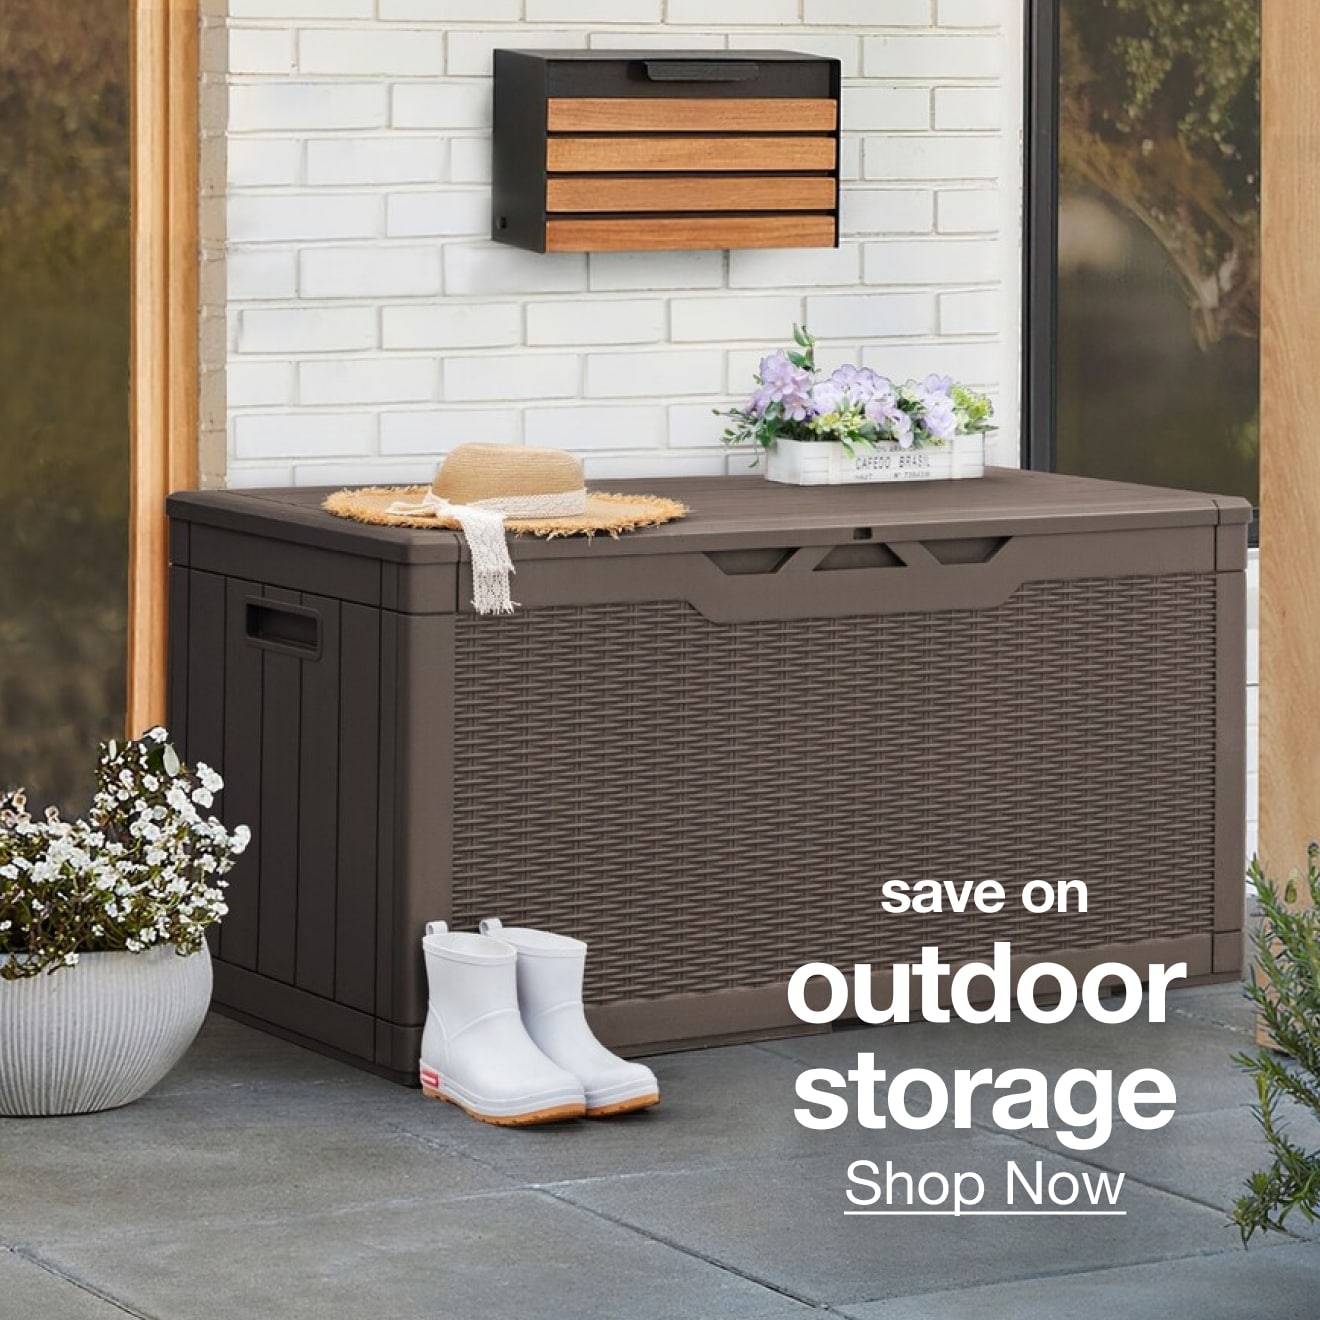 Save on Outdoor Storage — Shop Now